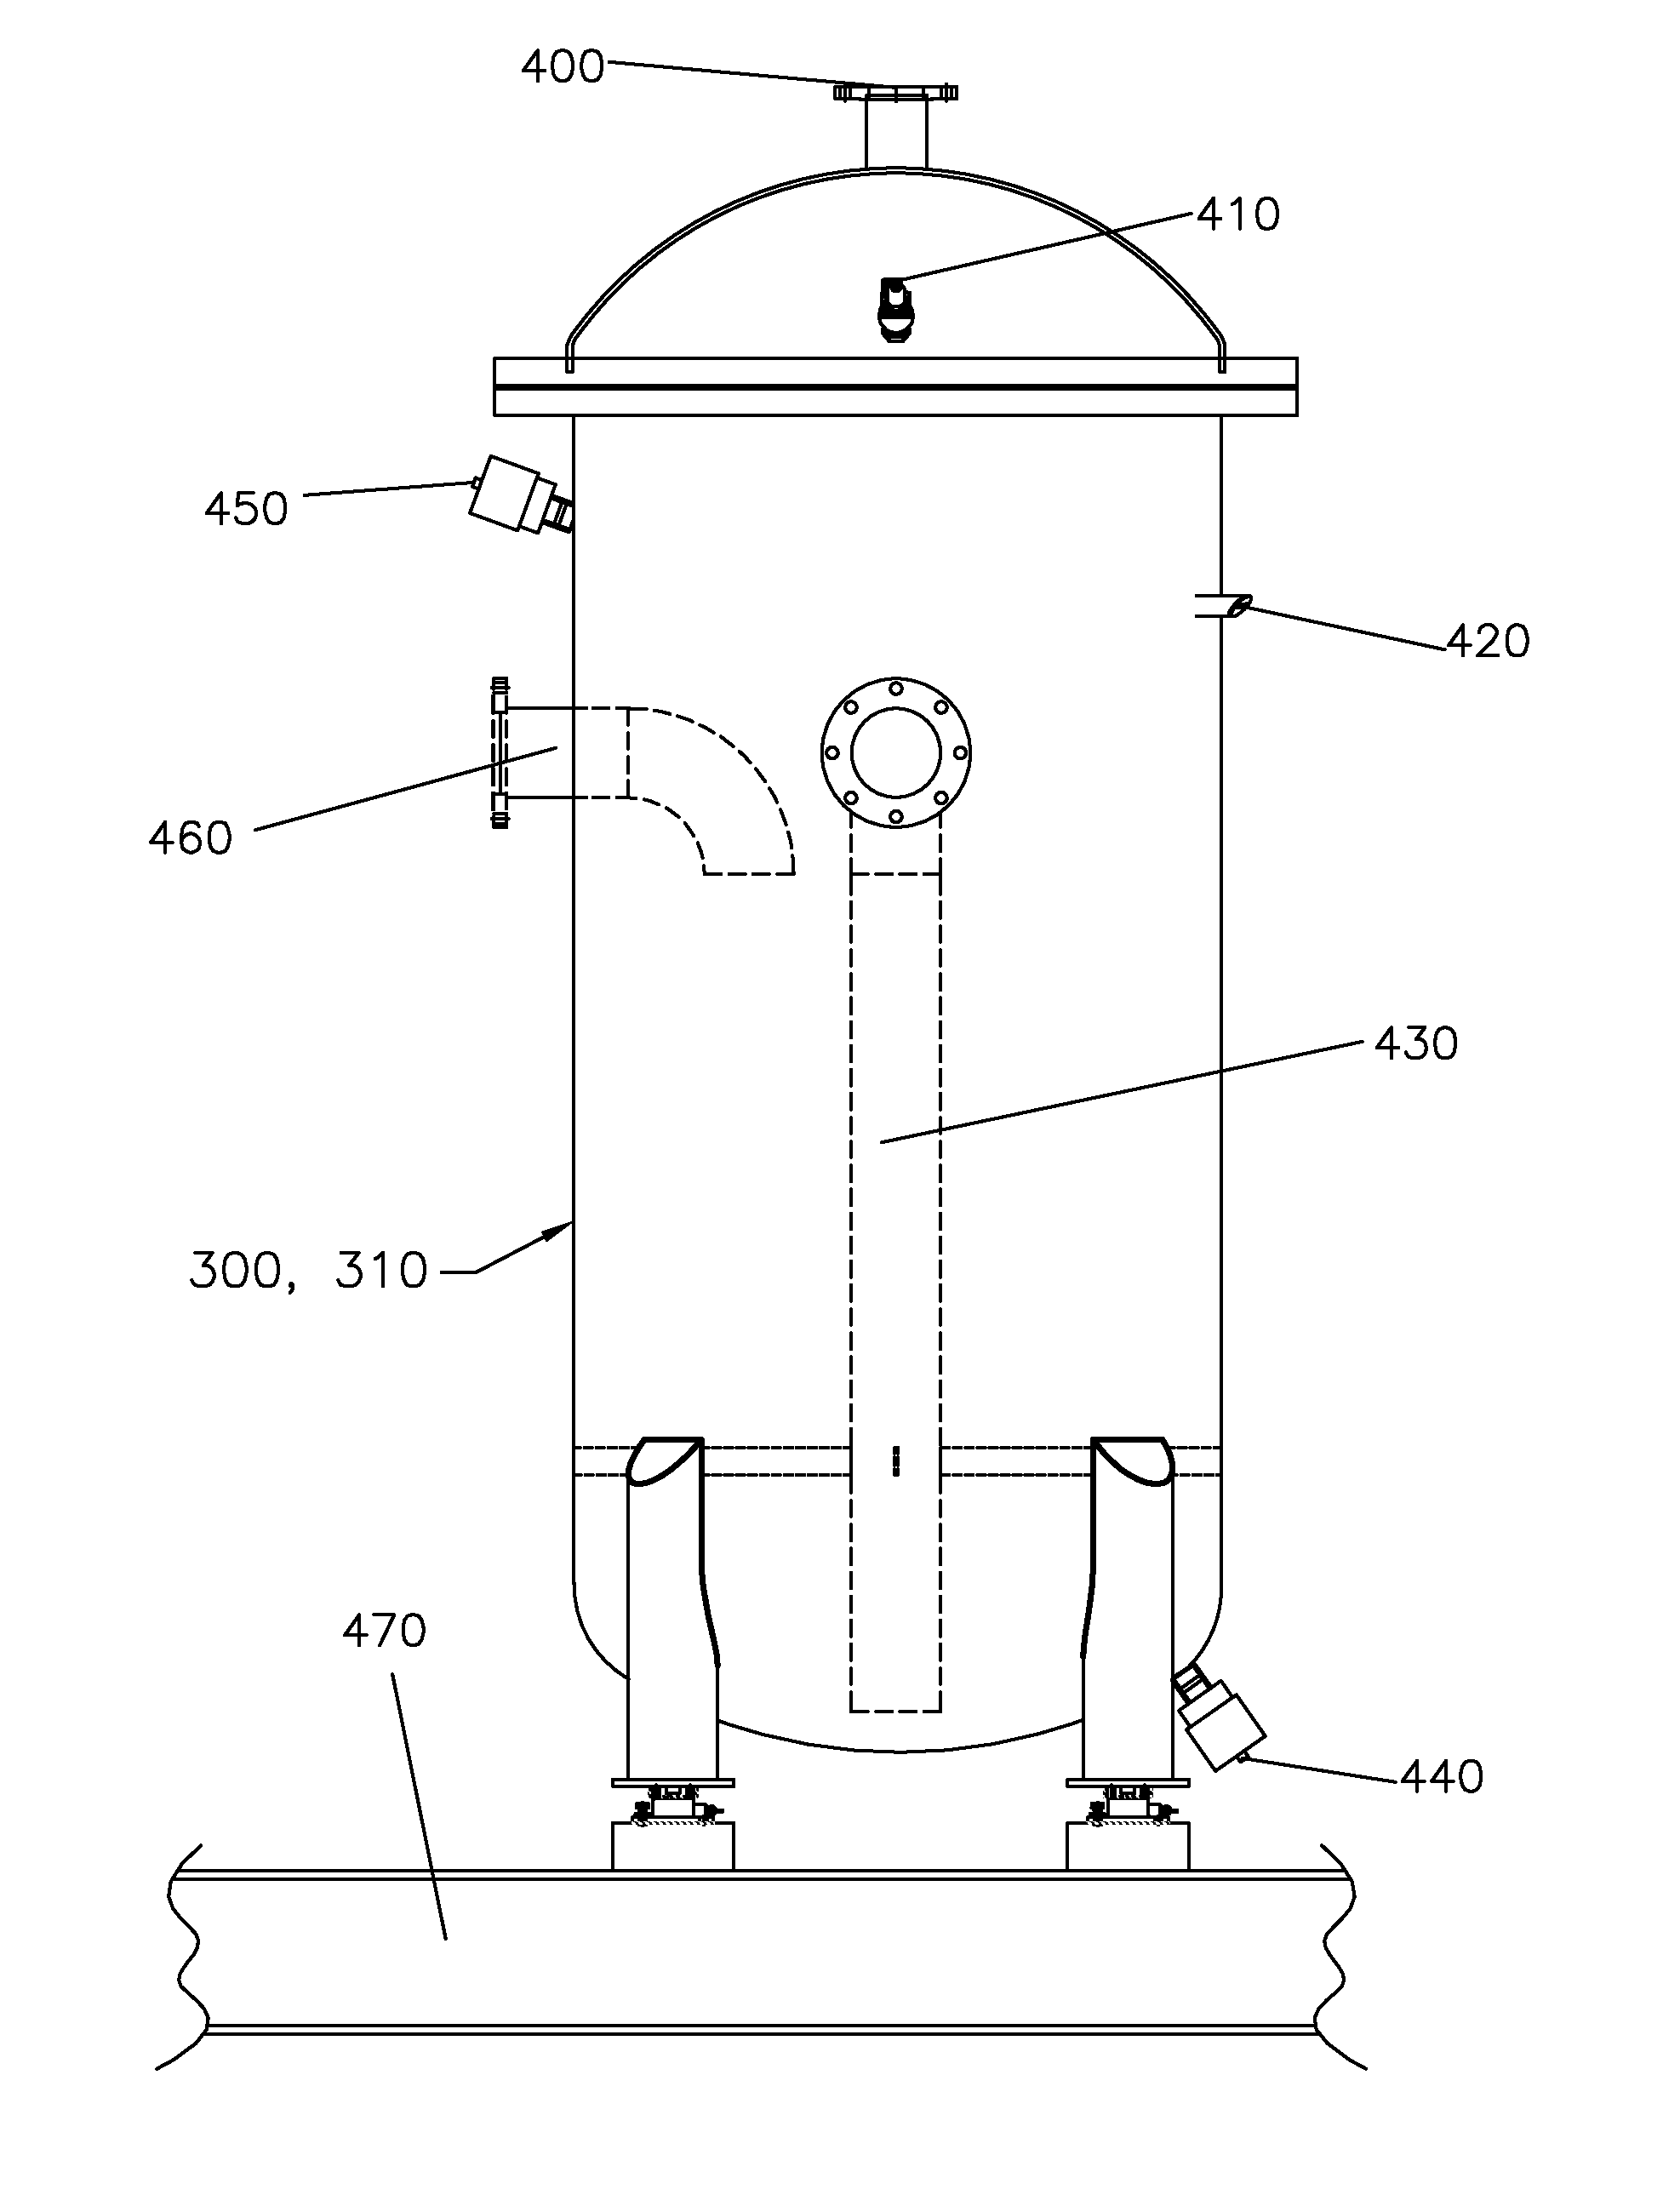 Accurate Dry Bulk Handling System and Method of Use